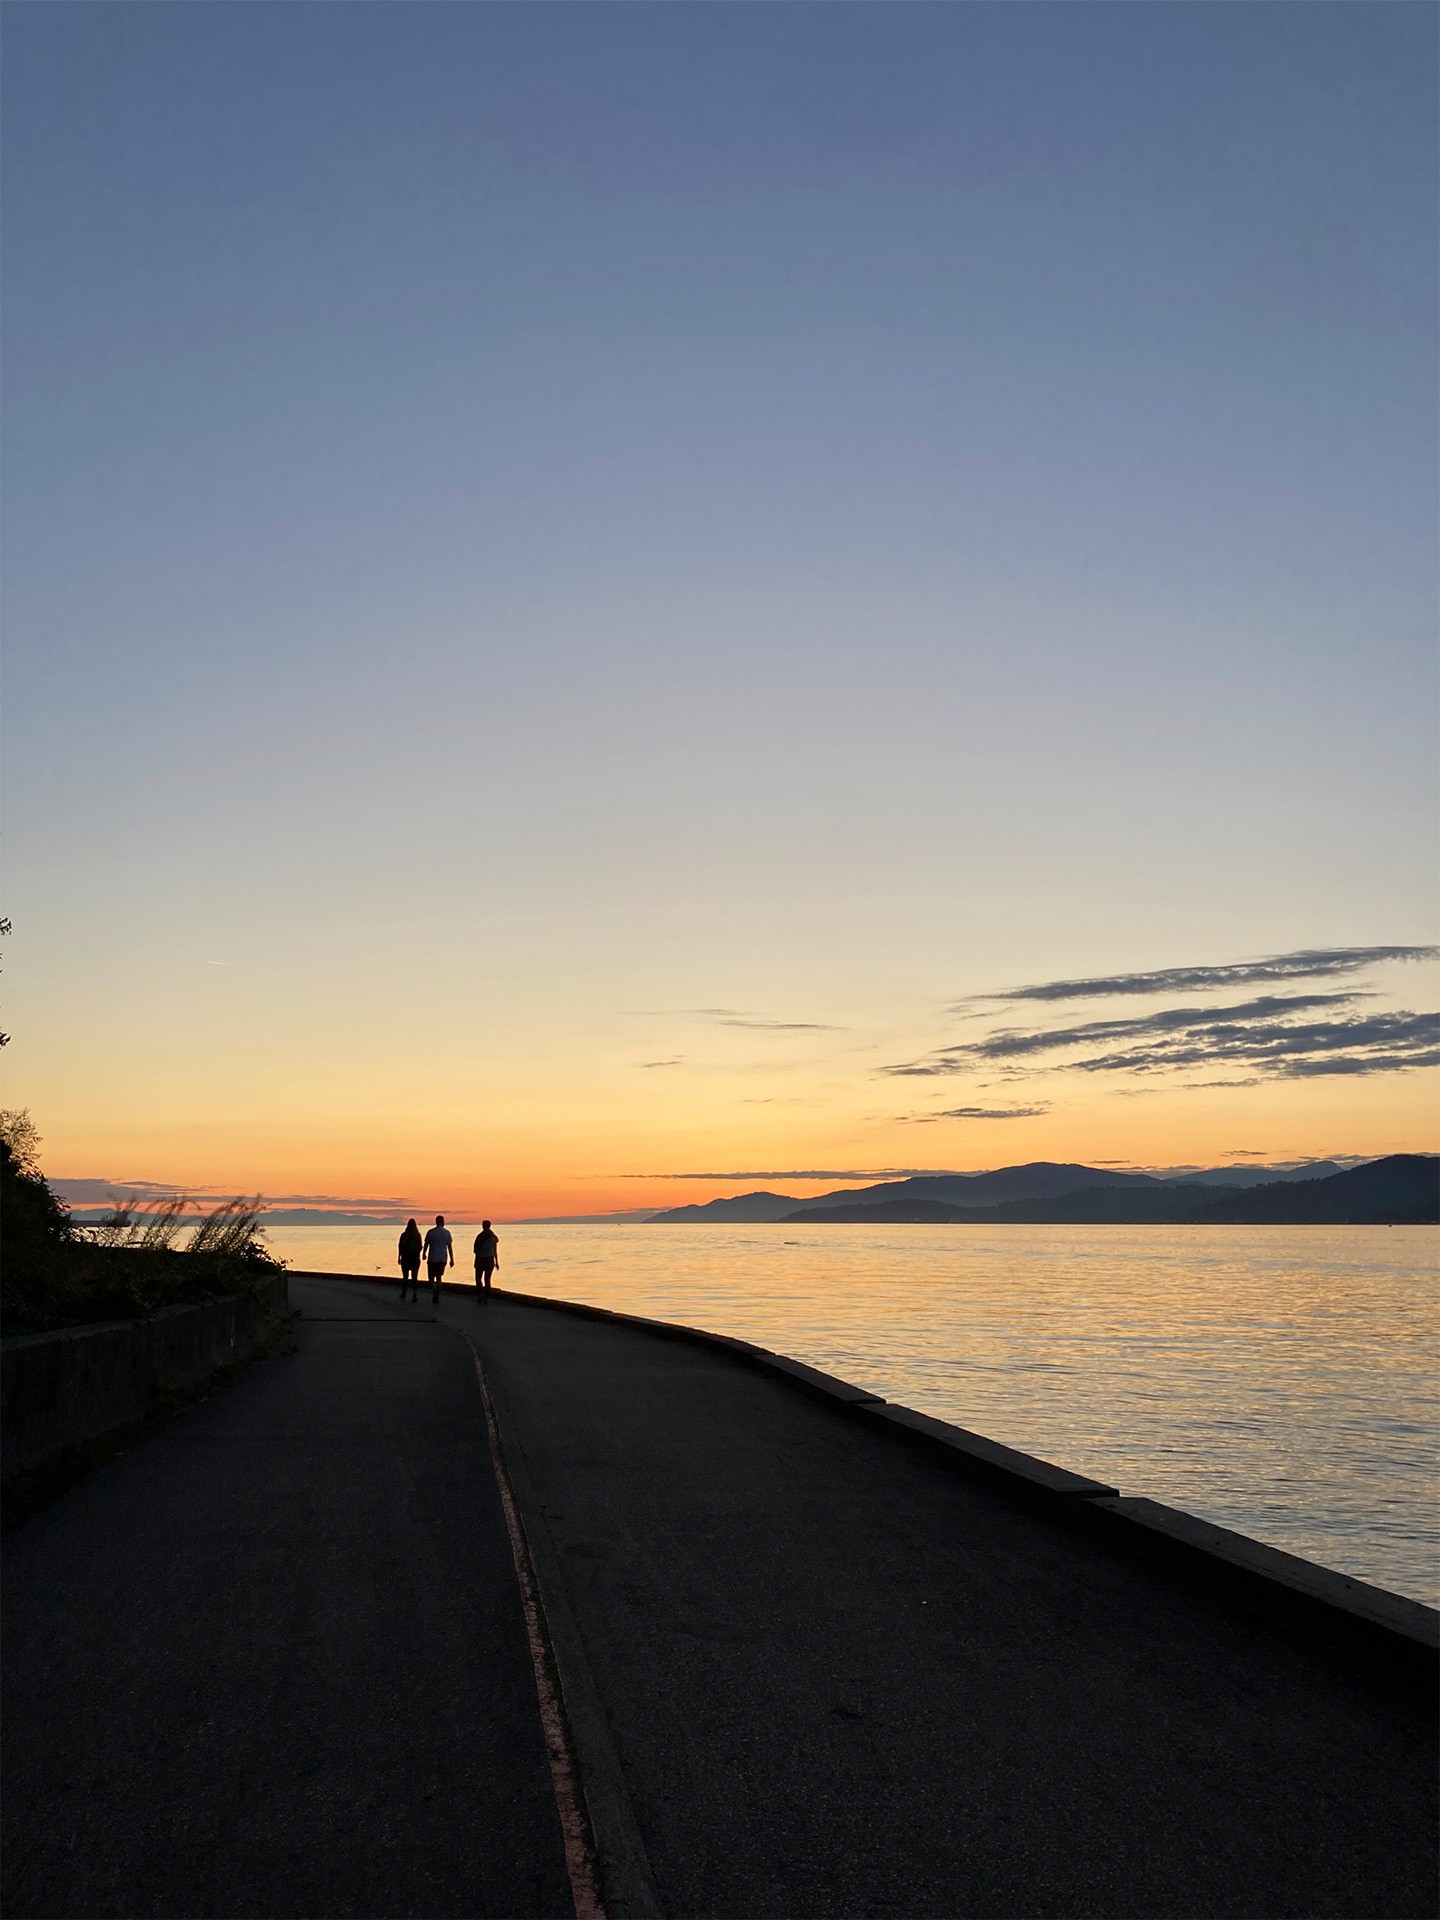 The seawall in Stanley Park next to a sun setting into the ocean and mountains beyond.